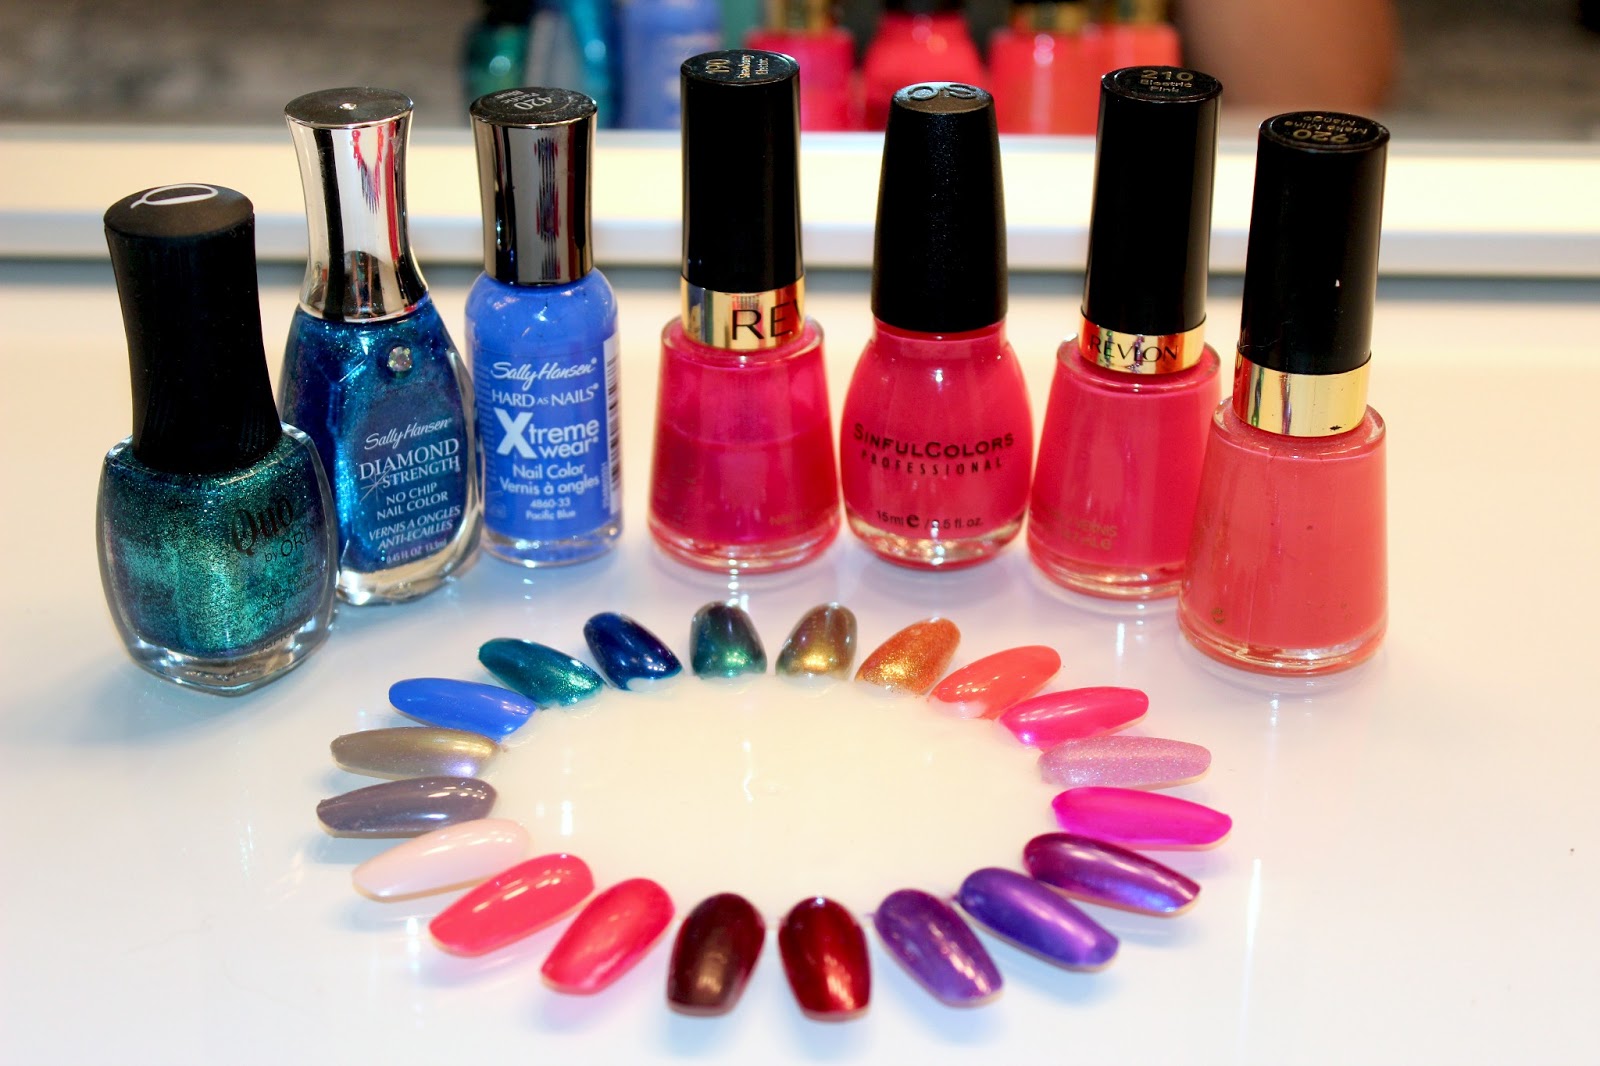 6. "Short and Sweet: The Best Nail Polish Shades for Short Nails" - wide 4